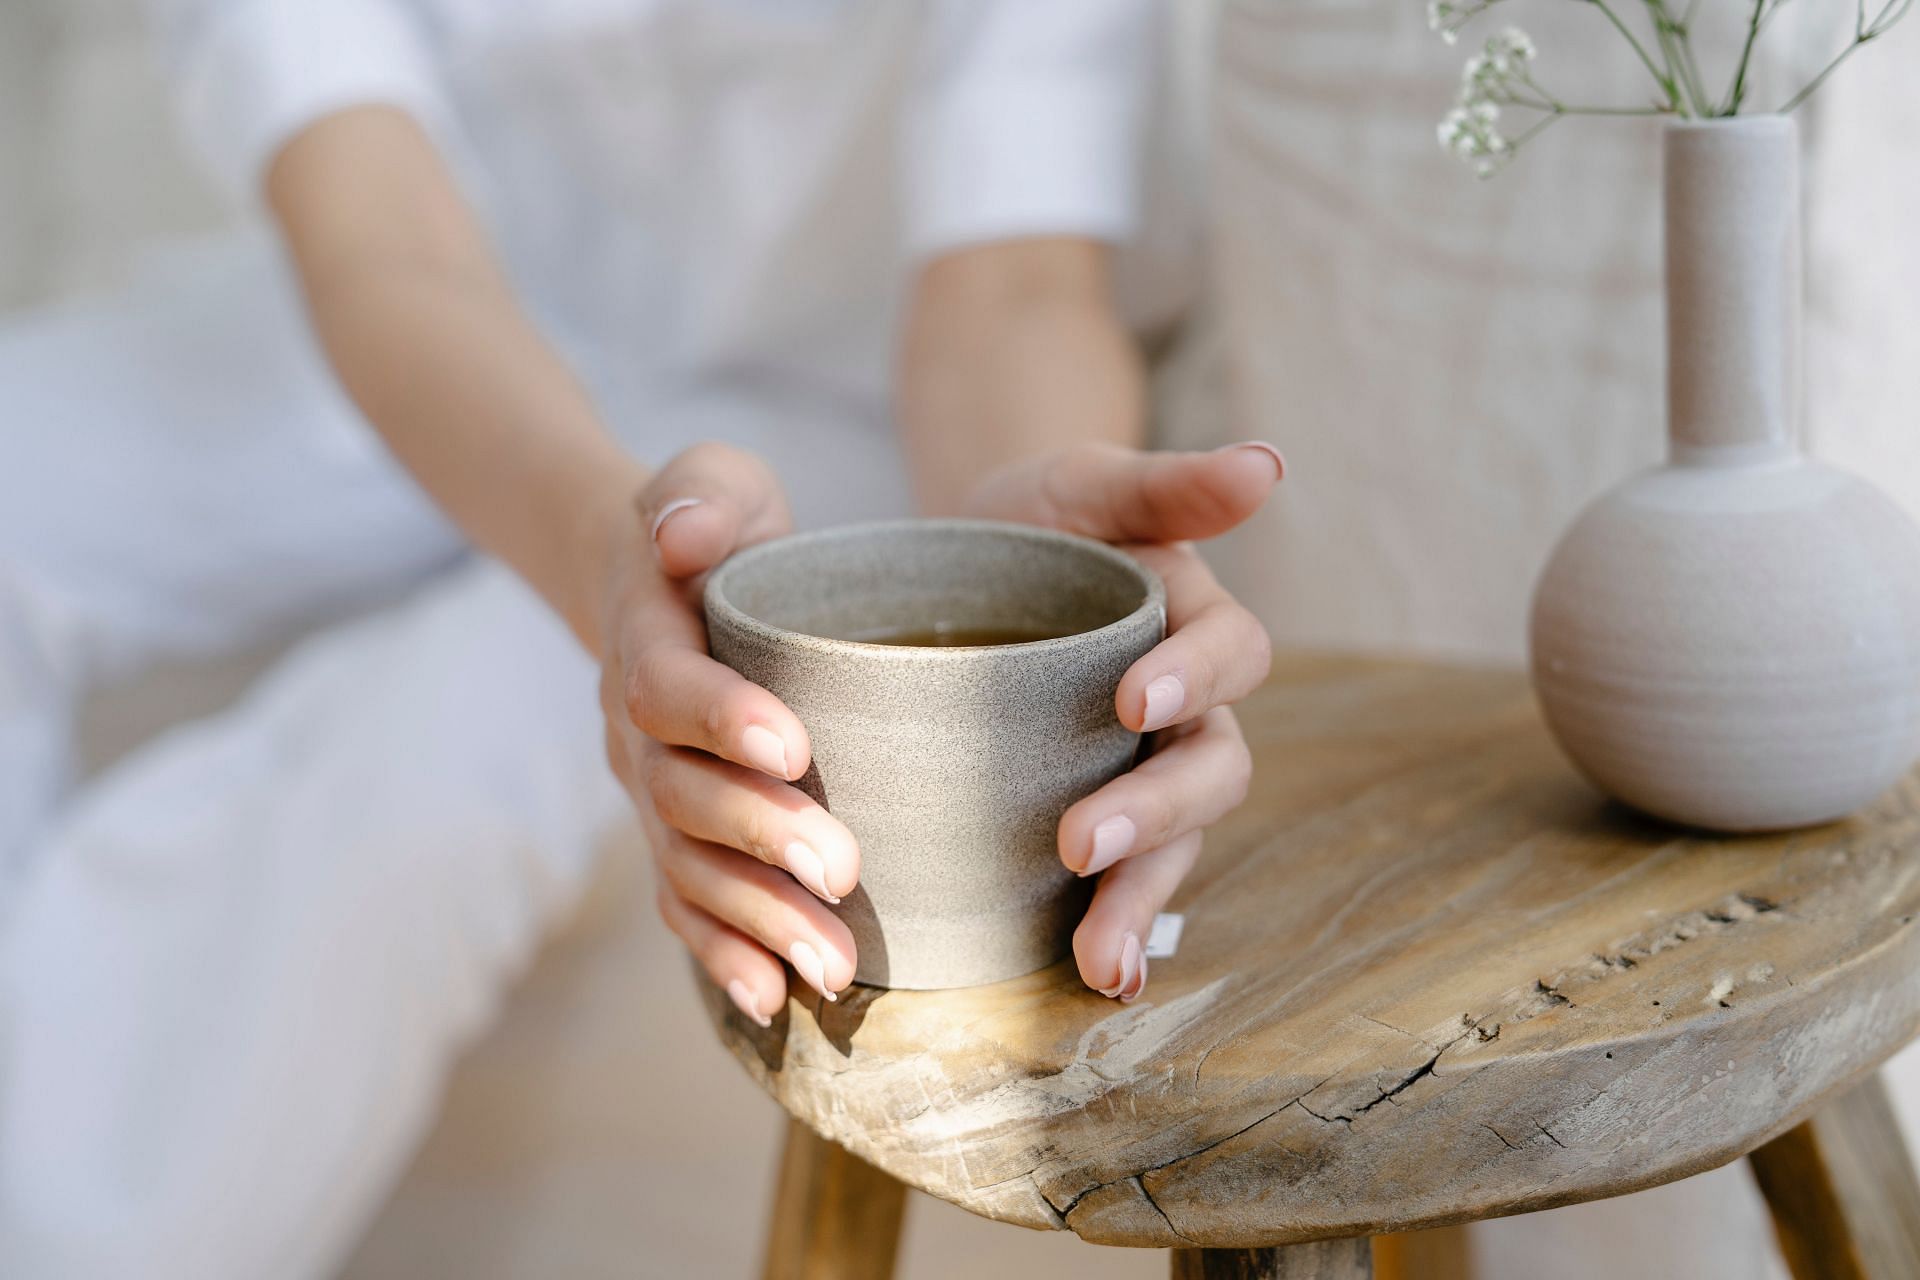 Importance of stress-relief teas (image sourced via Pexels / Photo by John)